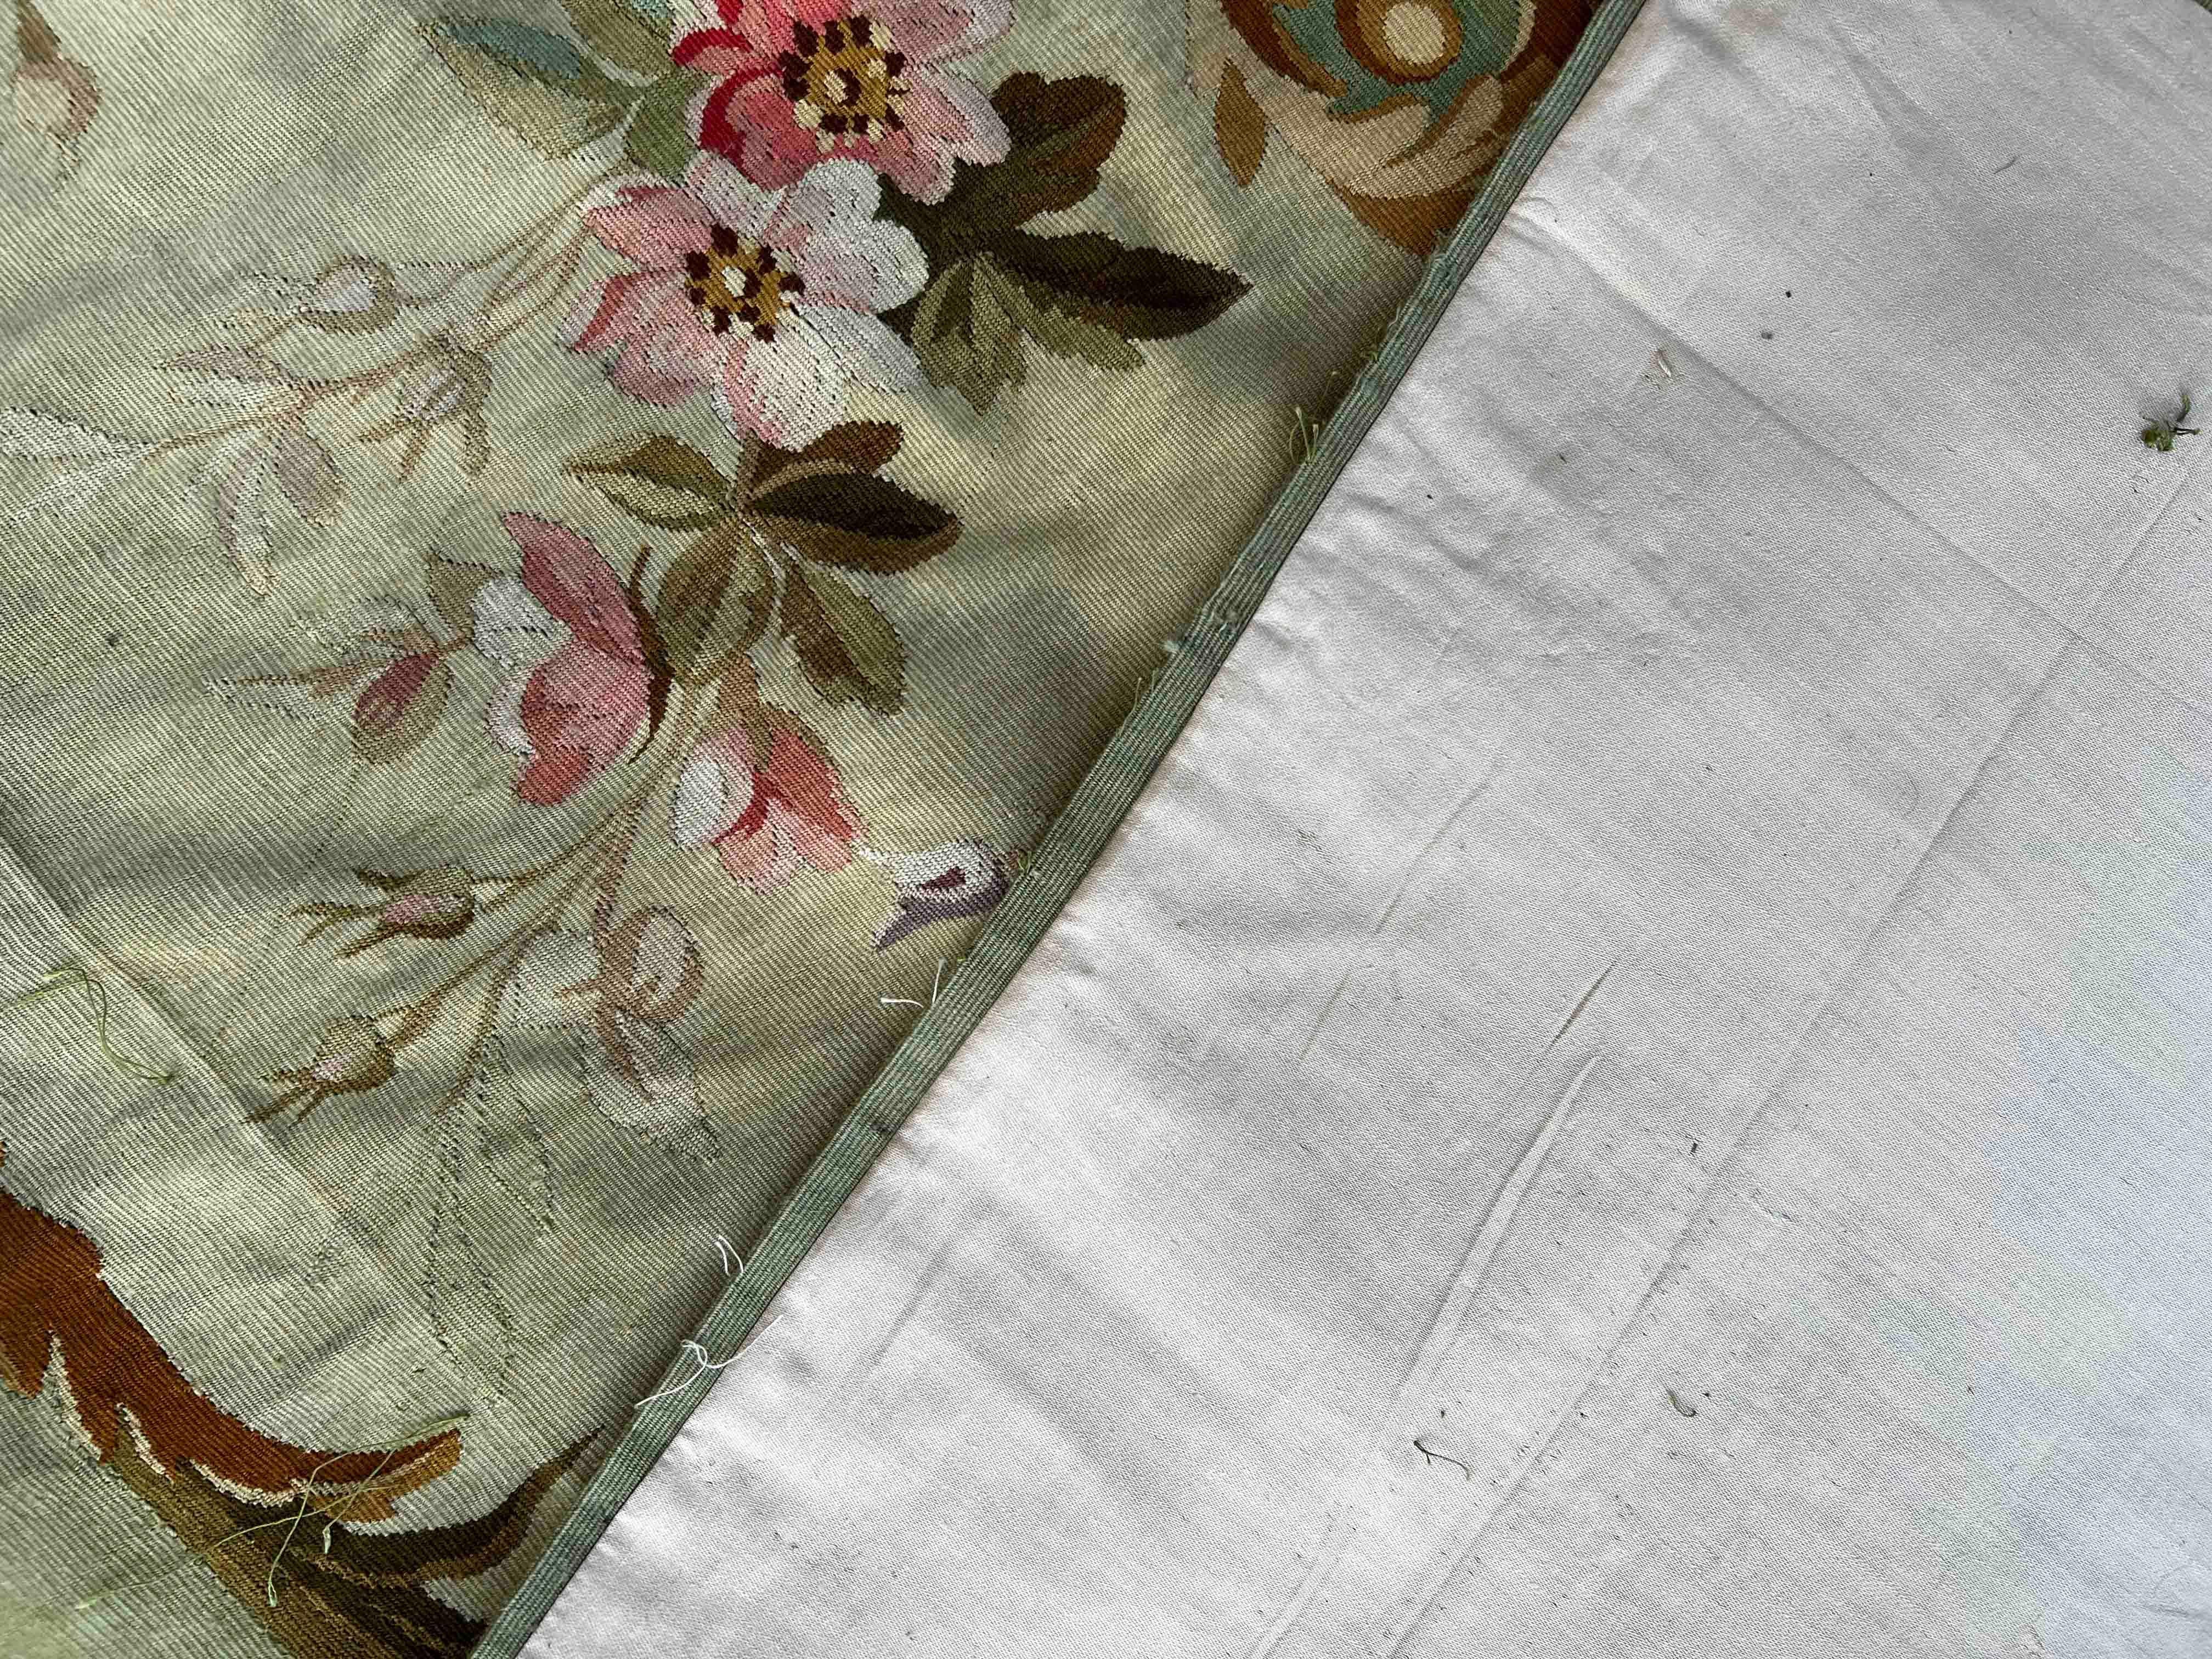 19th century Aubusson Tapestry Valance - 3m27x2m22 - No. 1356 For Sale 2